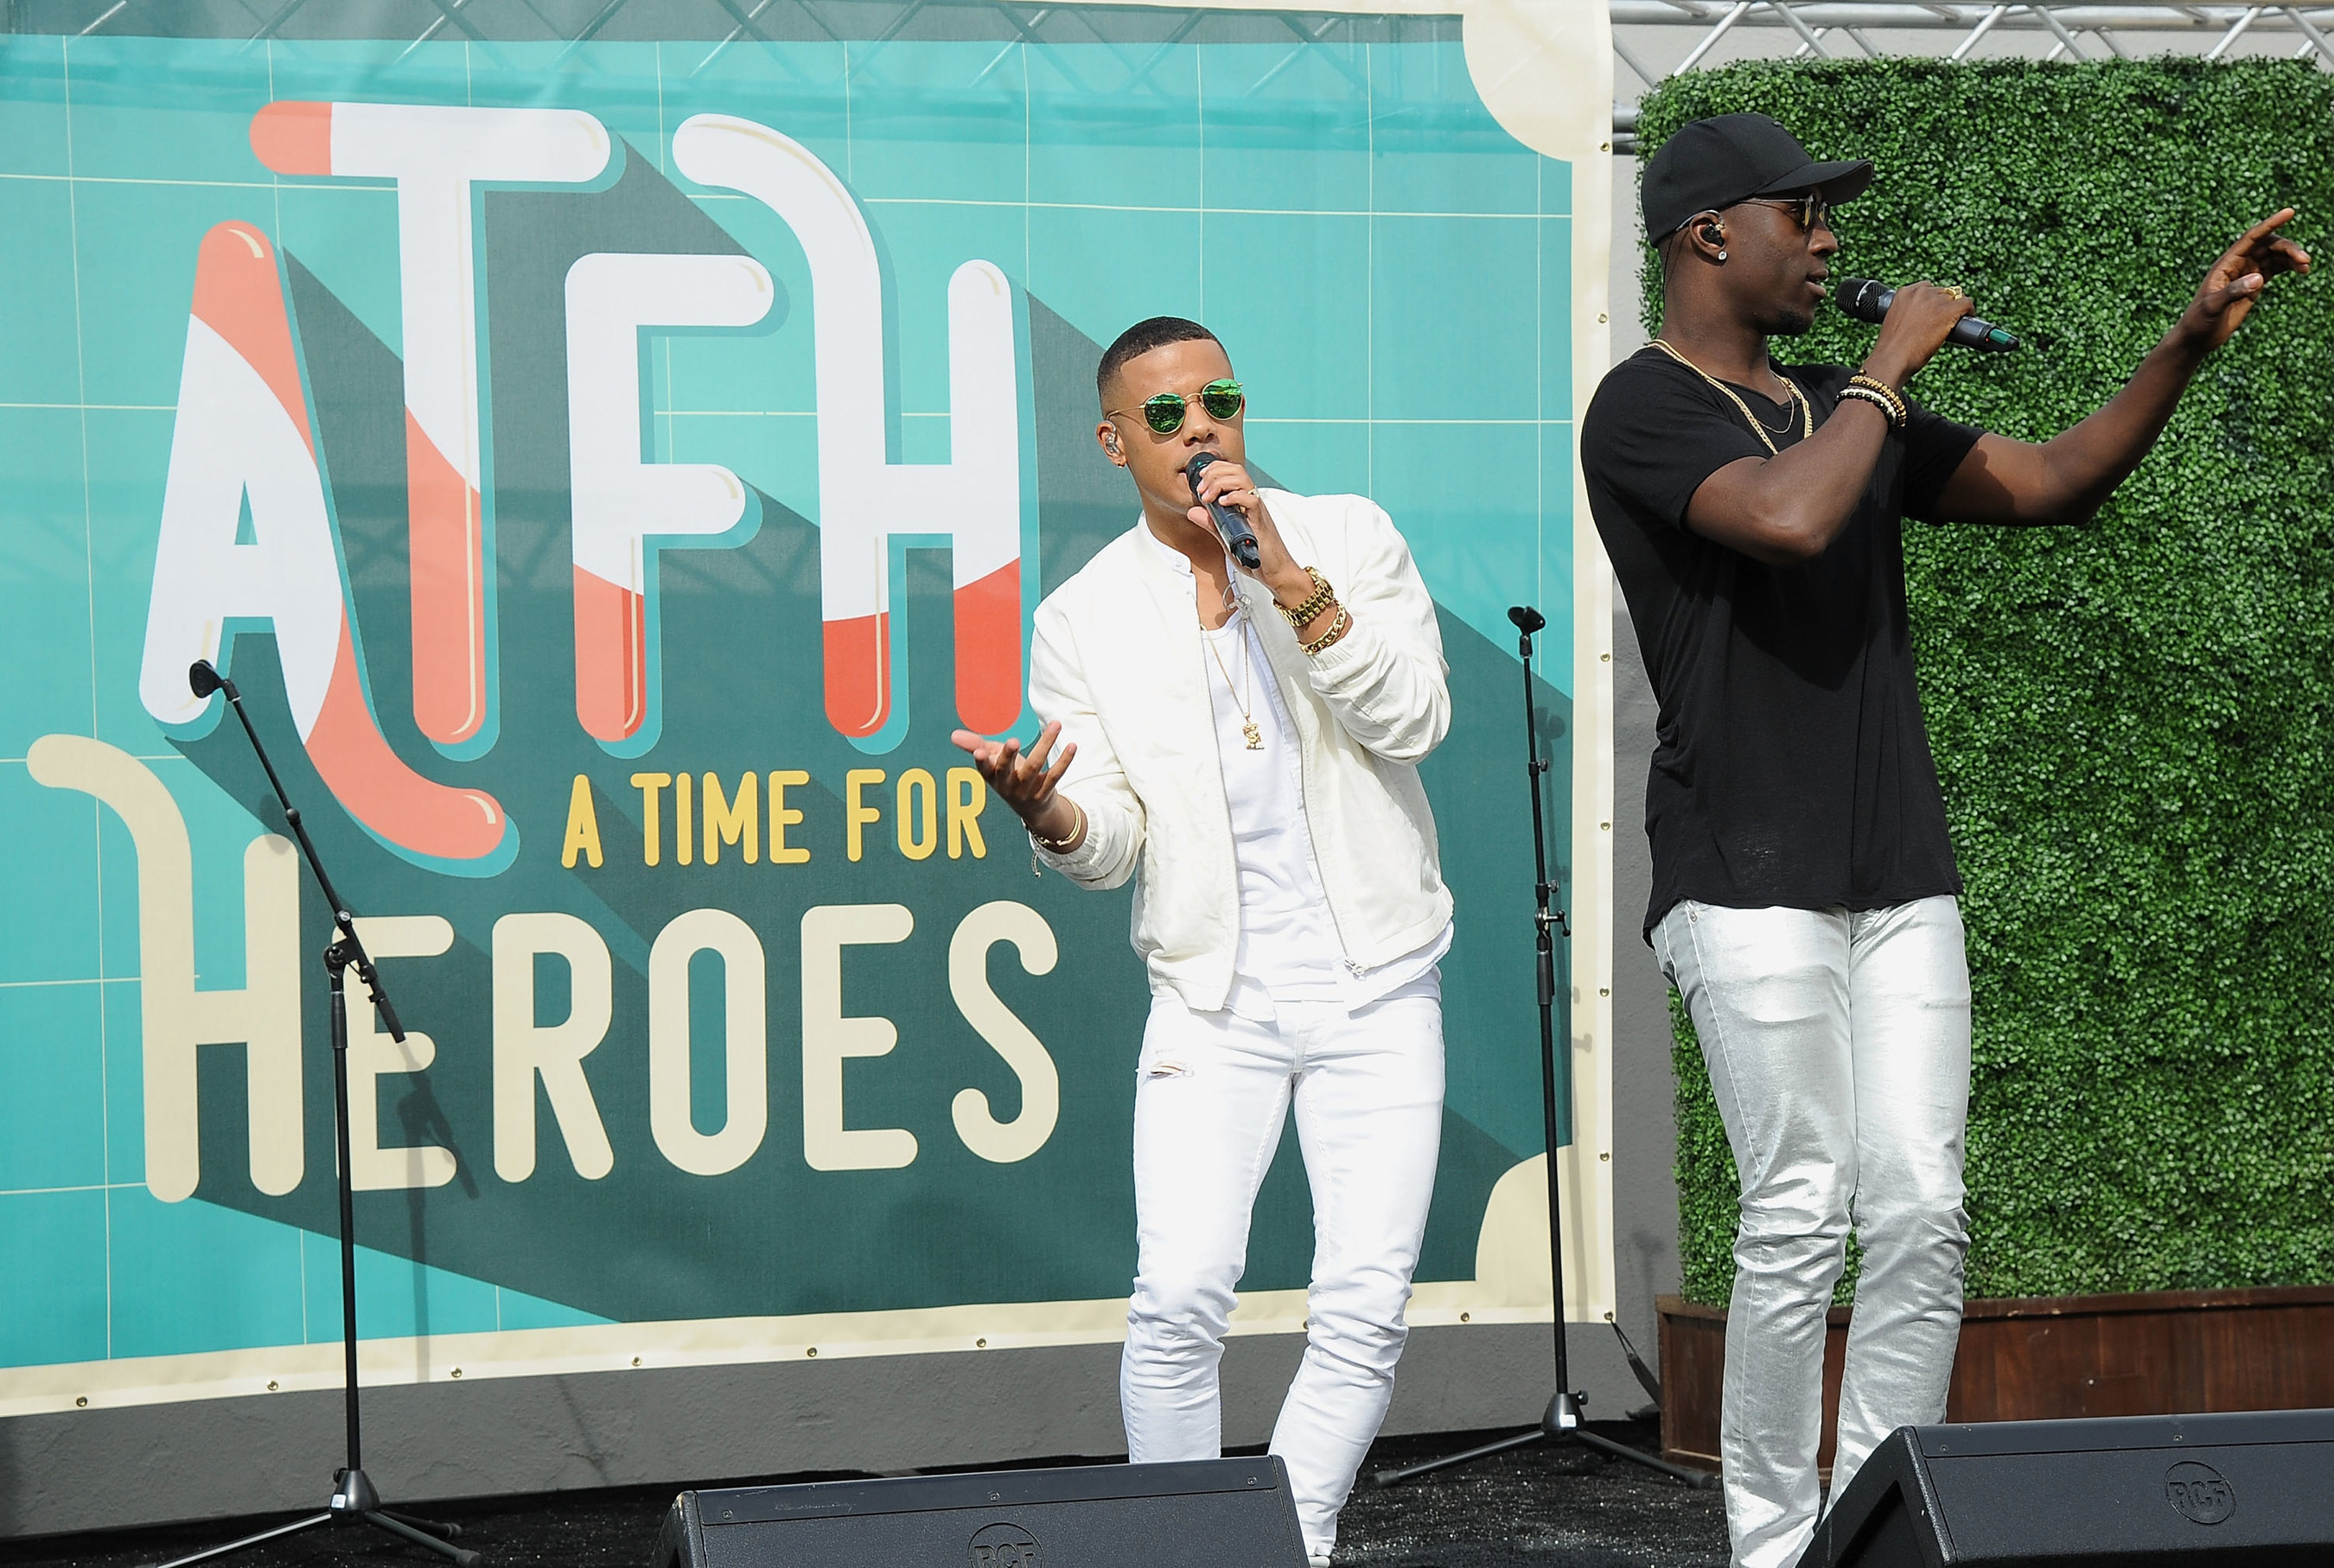 CULVER CITY, CA - OCTOBER 25: Nico and Vinz perform at the Elizabeth Glaser Pediatric AIDS Foundation's 26th Annual A Time For Heroes Family Festival at Smashbox Studios on October 25, 2015 in Culver City, California. (Photo by Angela Weiss/Getty Images for Elizabeth Glaser Pediatric AIDS Foundation)